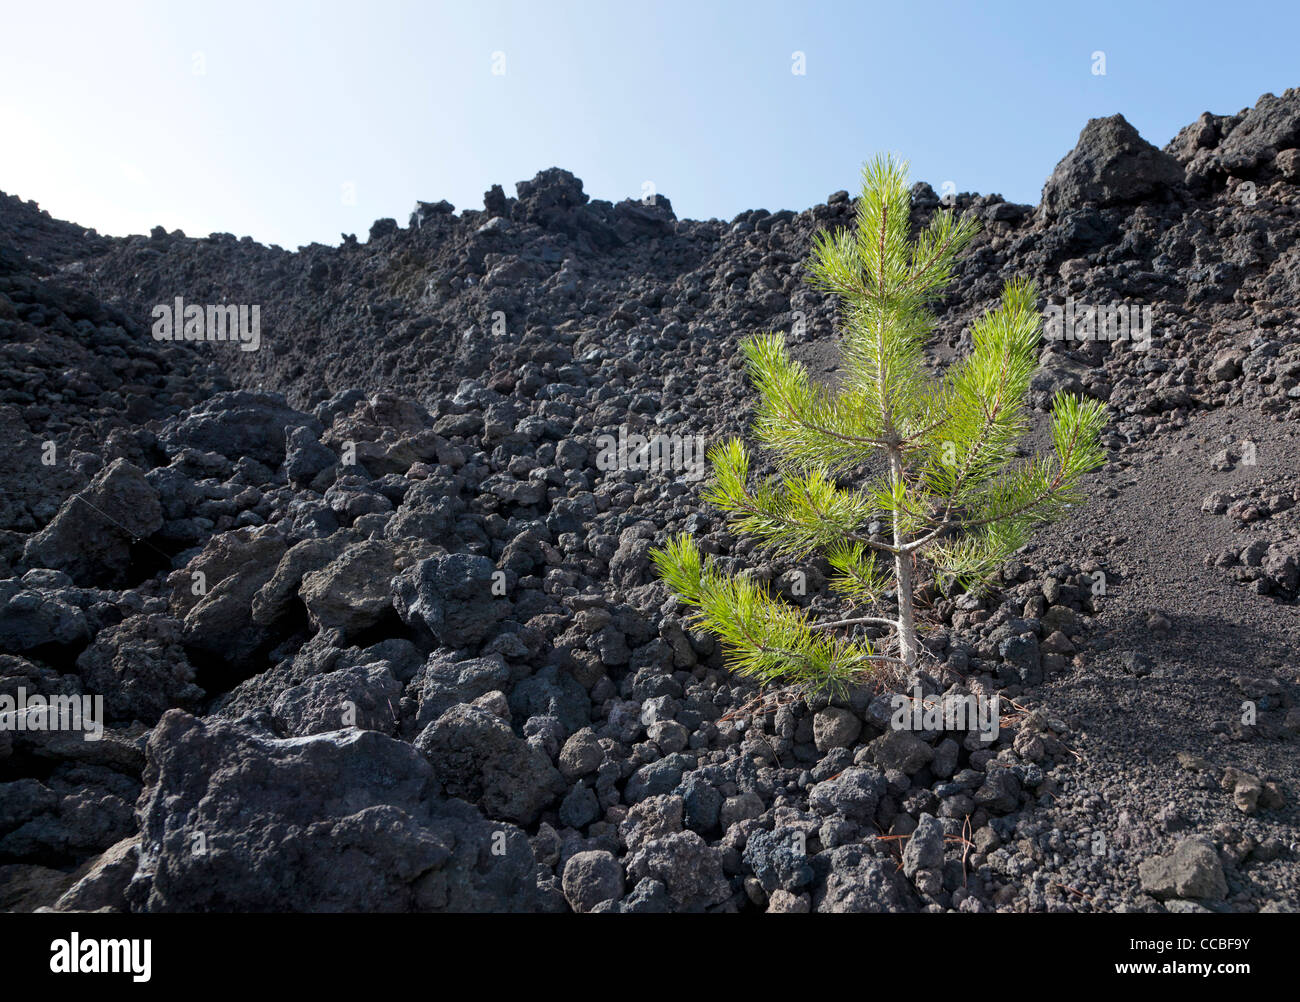 Young tree in stream of lava Stock Photo